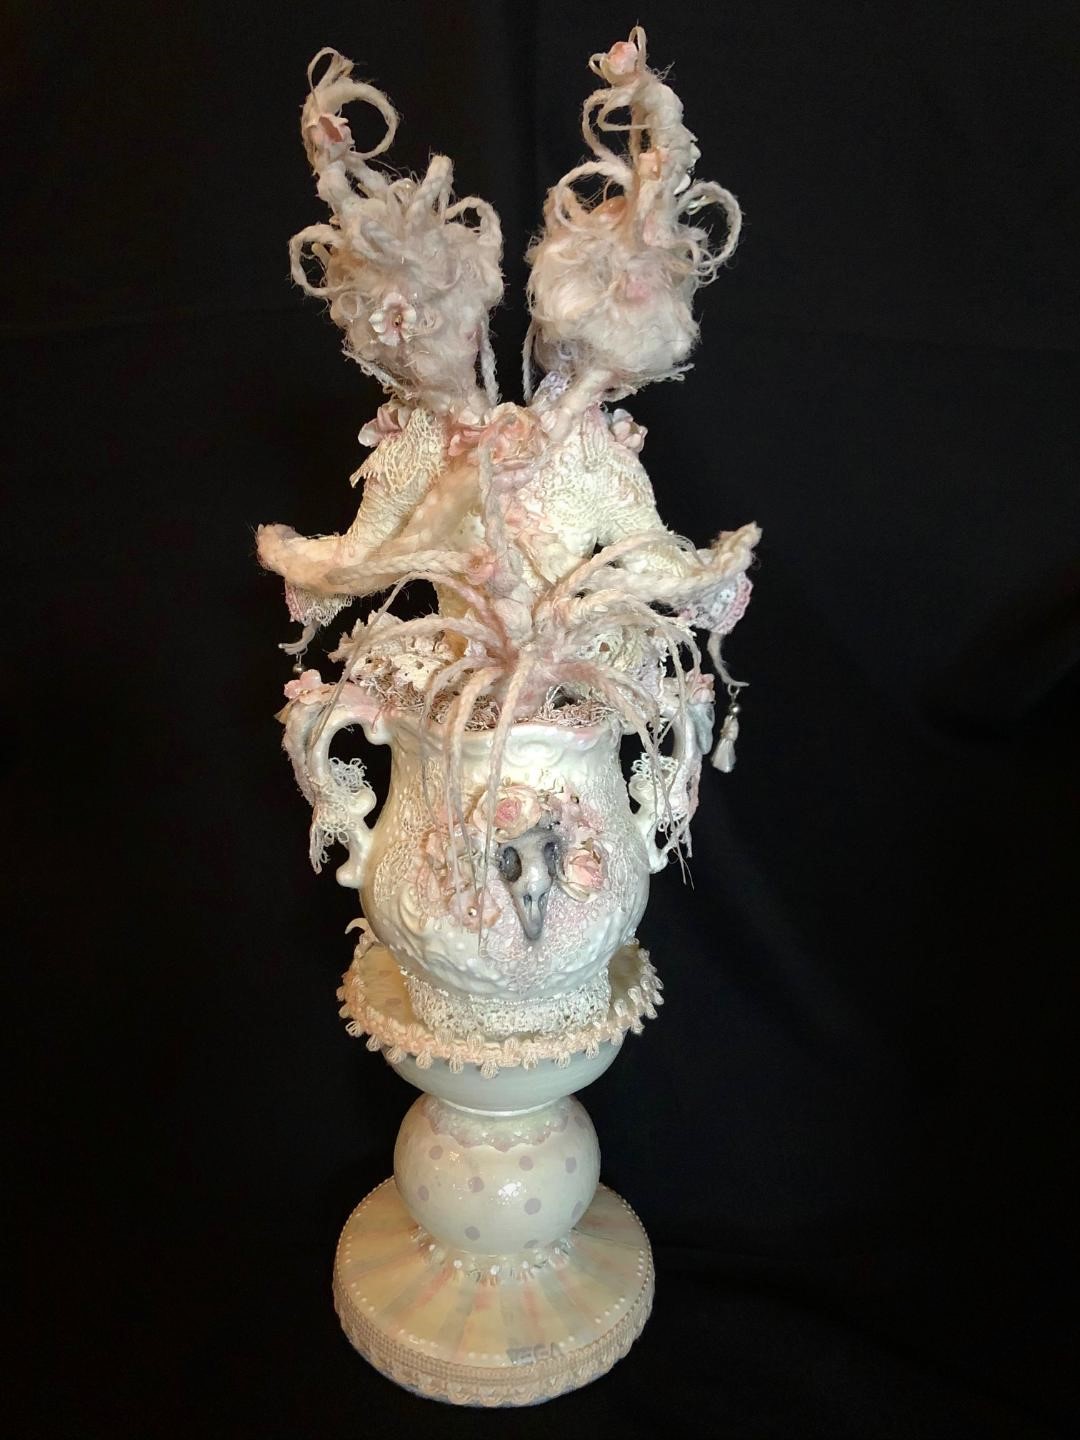 back view of white rococo baroque mixed media assemblage conjoined bird dolls in a vase on pedestal